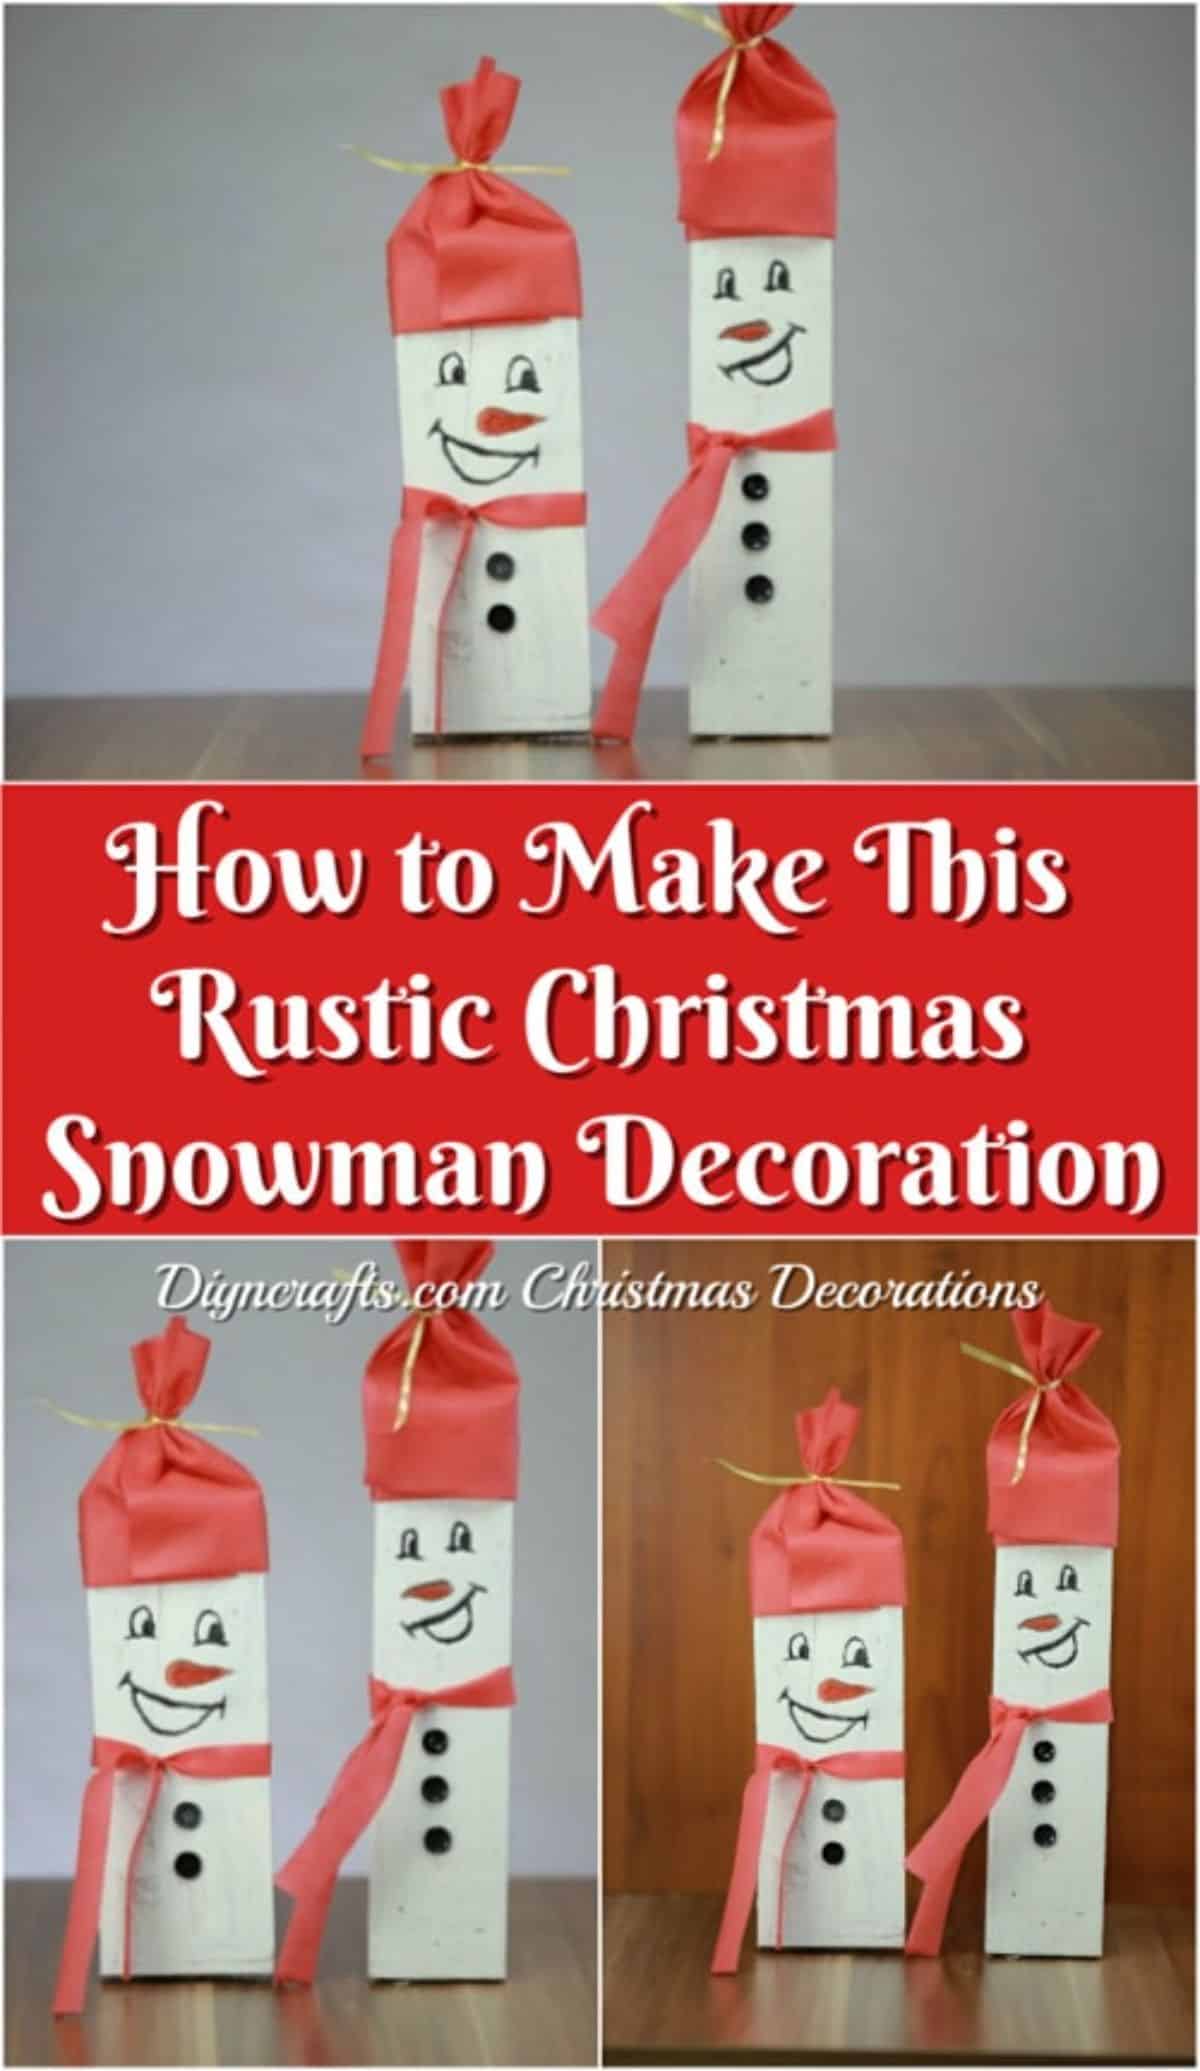 How to Make a Rustic Christmas Snowman Decoration